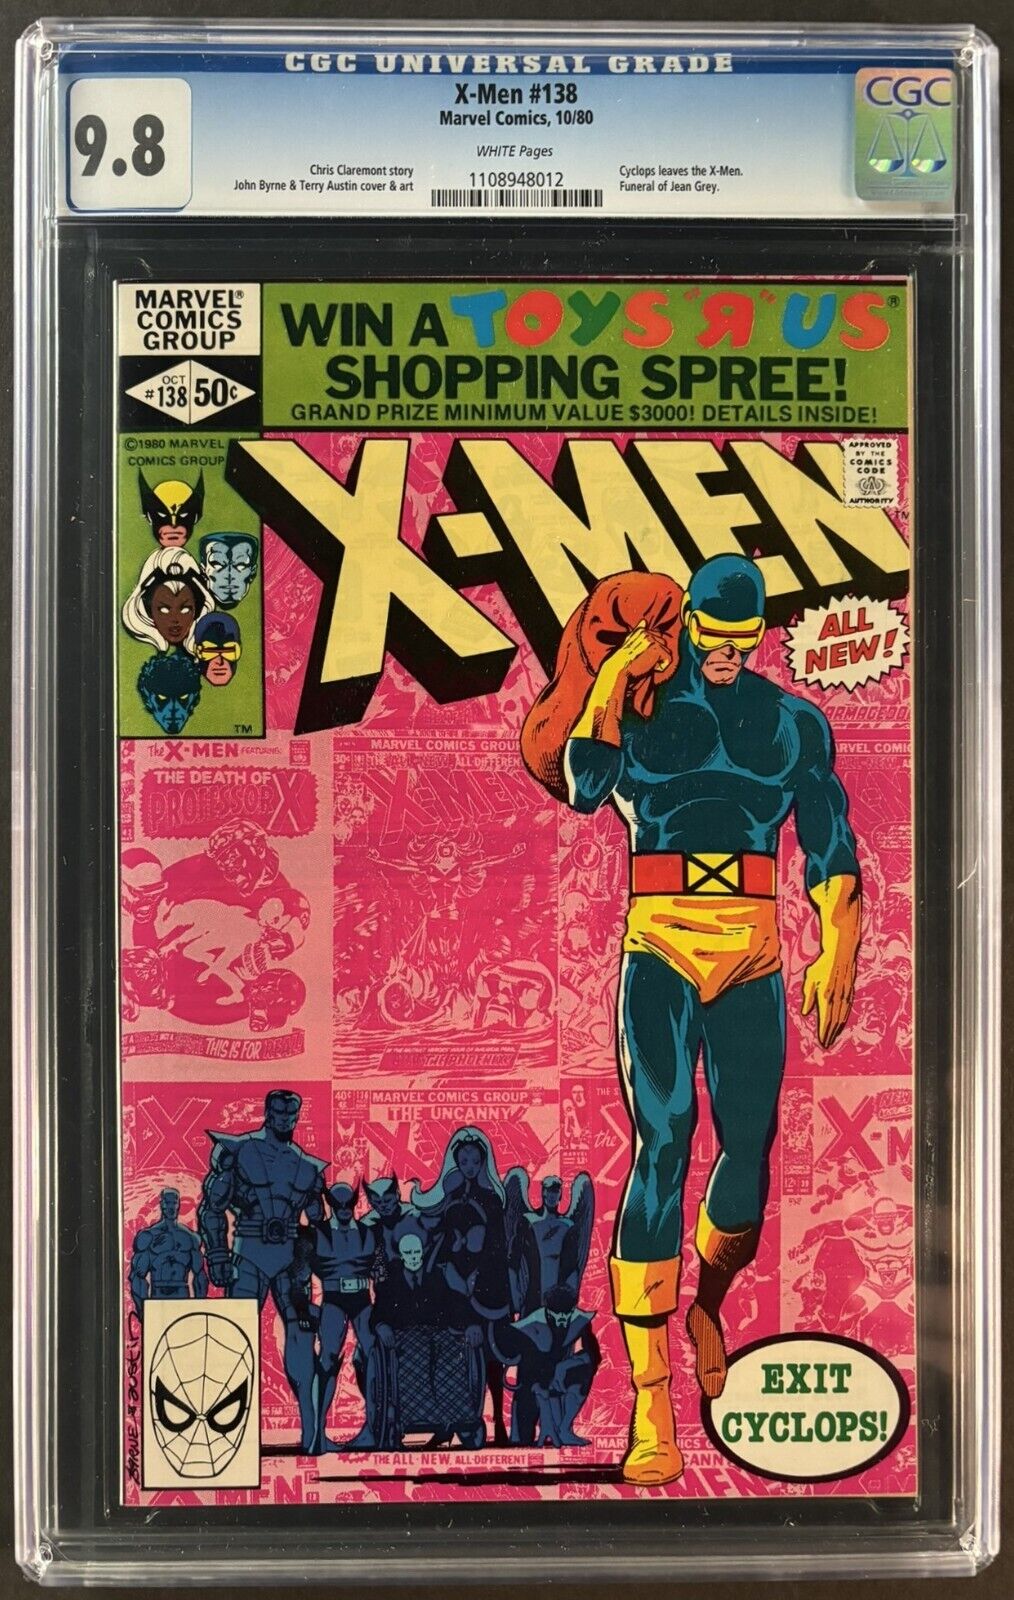 X-MEN #138 CGC 9.8 WHITE PAGES MARVEL COMICS OCTOBER 1980 - FUNERAL OF JEAN GREY